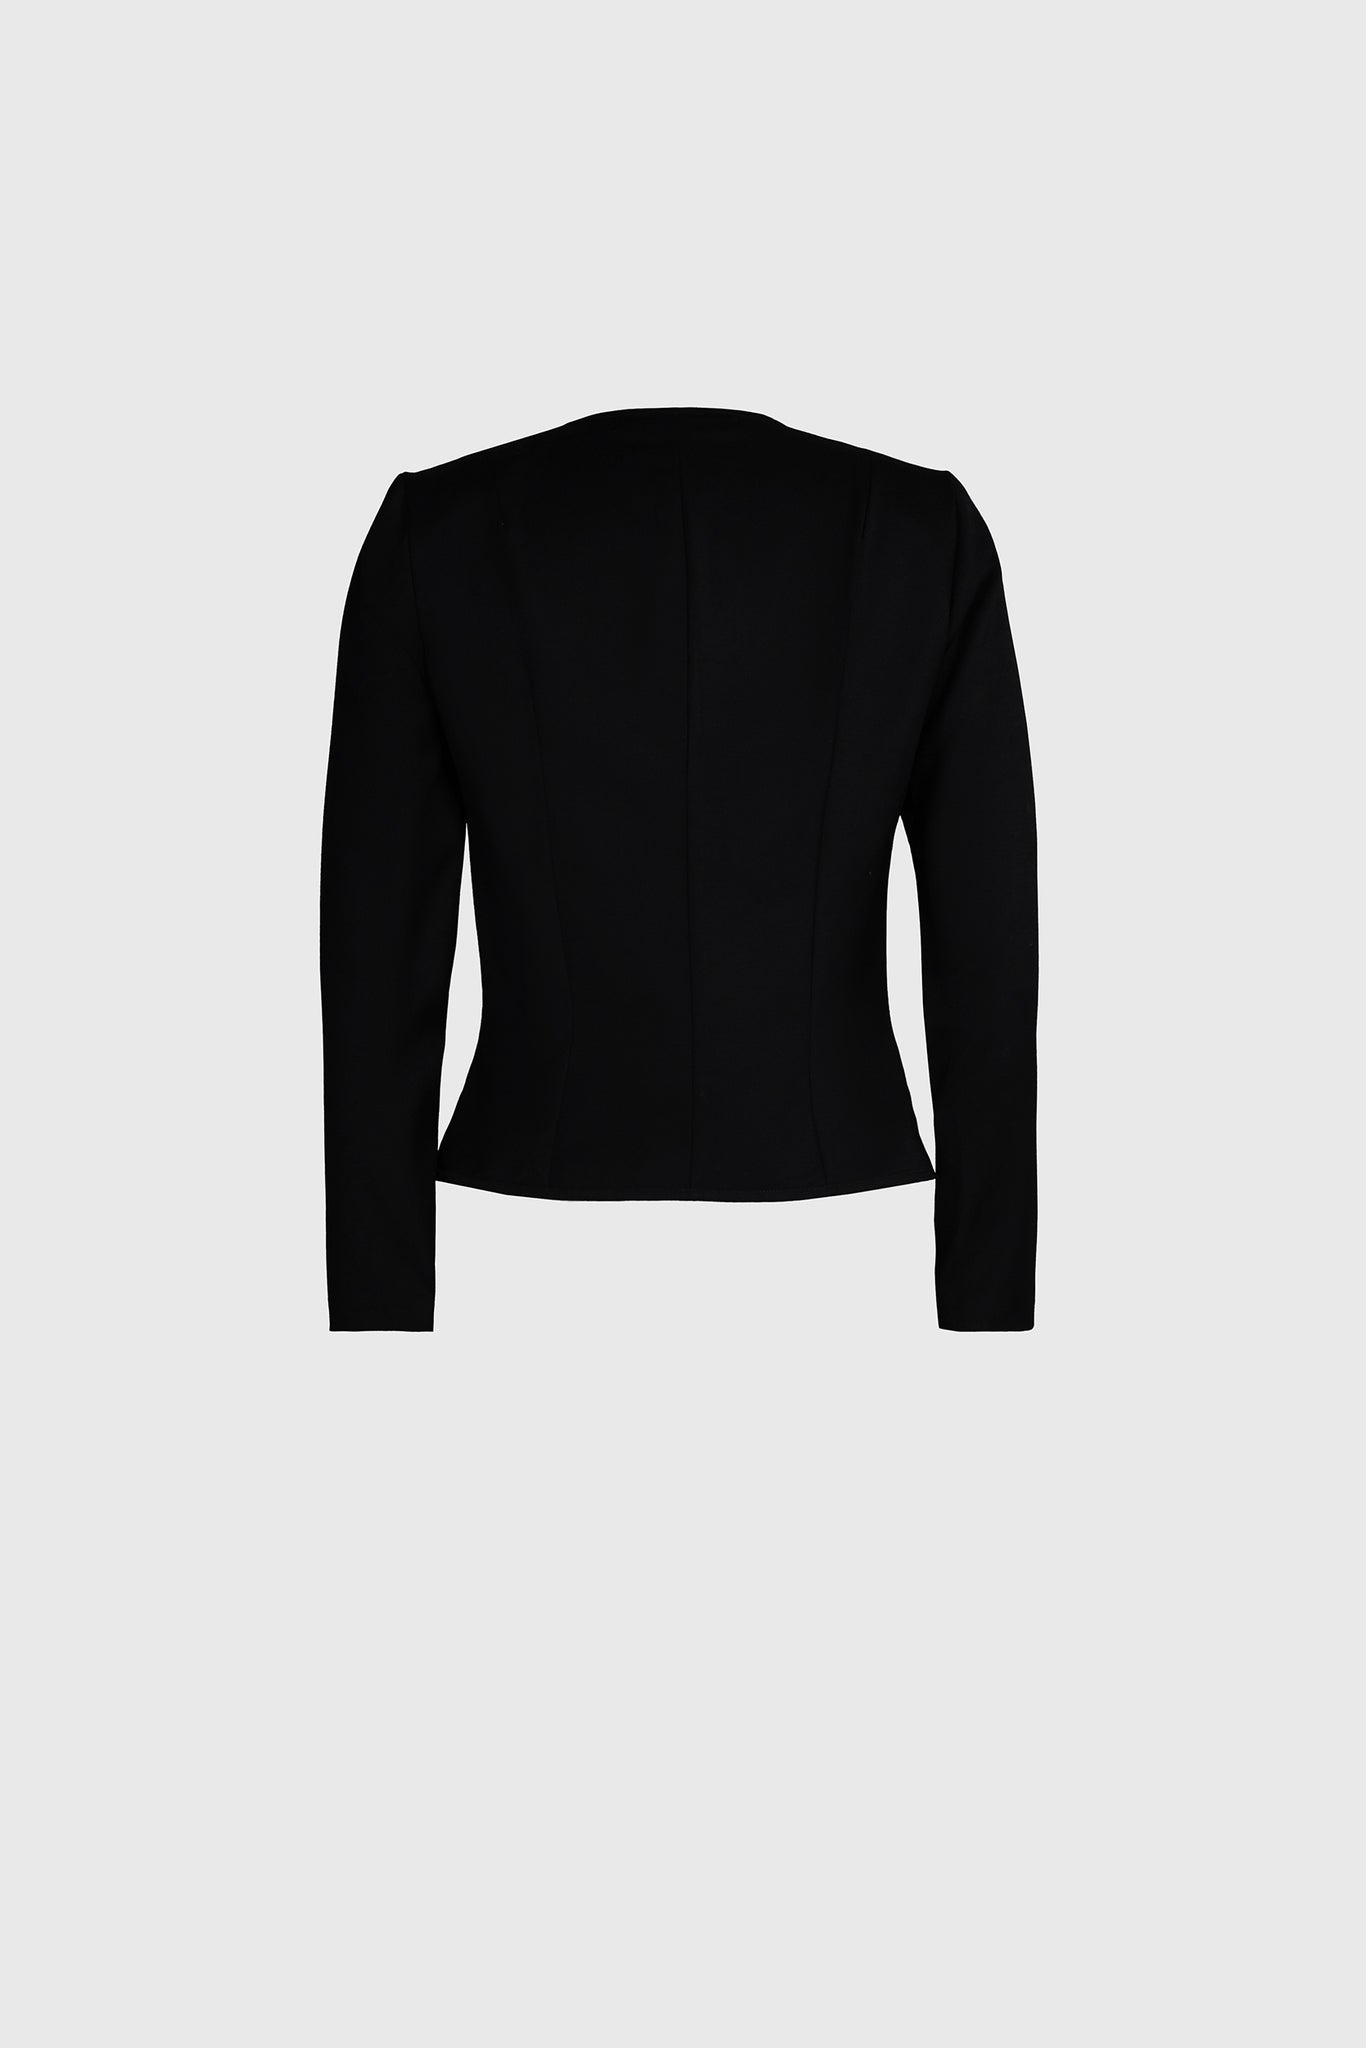 tailored bolero, fitted silhouette, created for women of business, lawyer, entrepreneur lifestyle, sustainable 100% natural textiles, Italian soft wool, cut for fit, rounded shoulders, curved long sleeves 